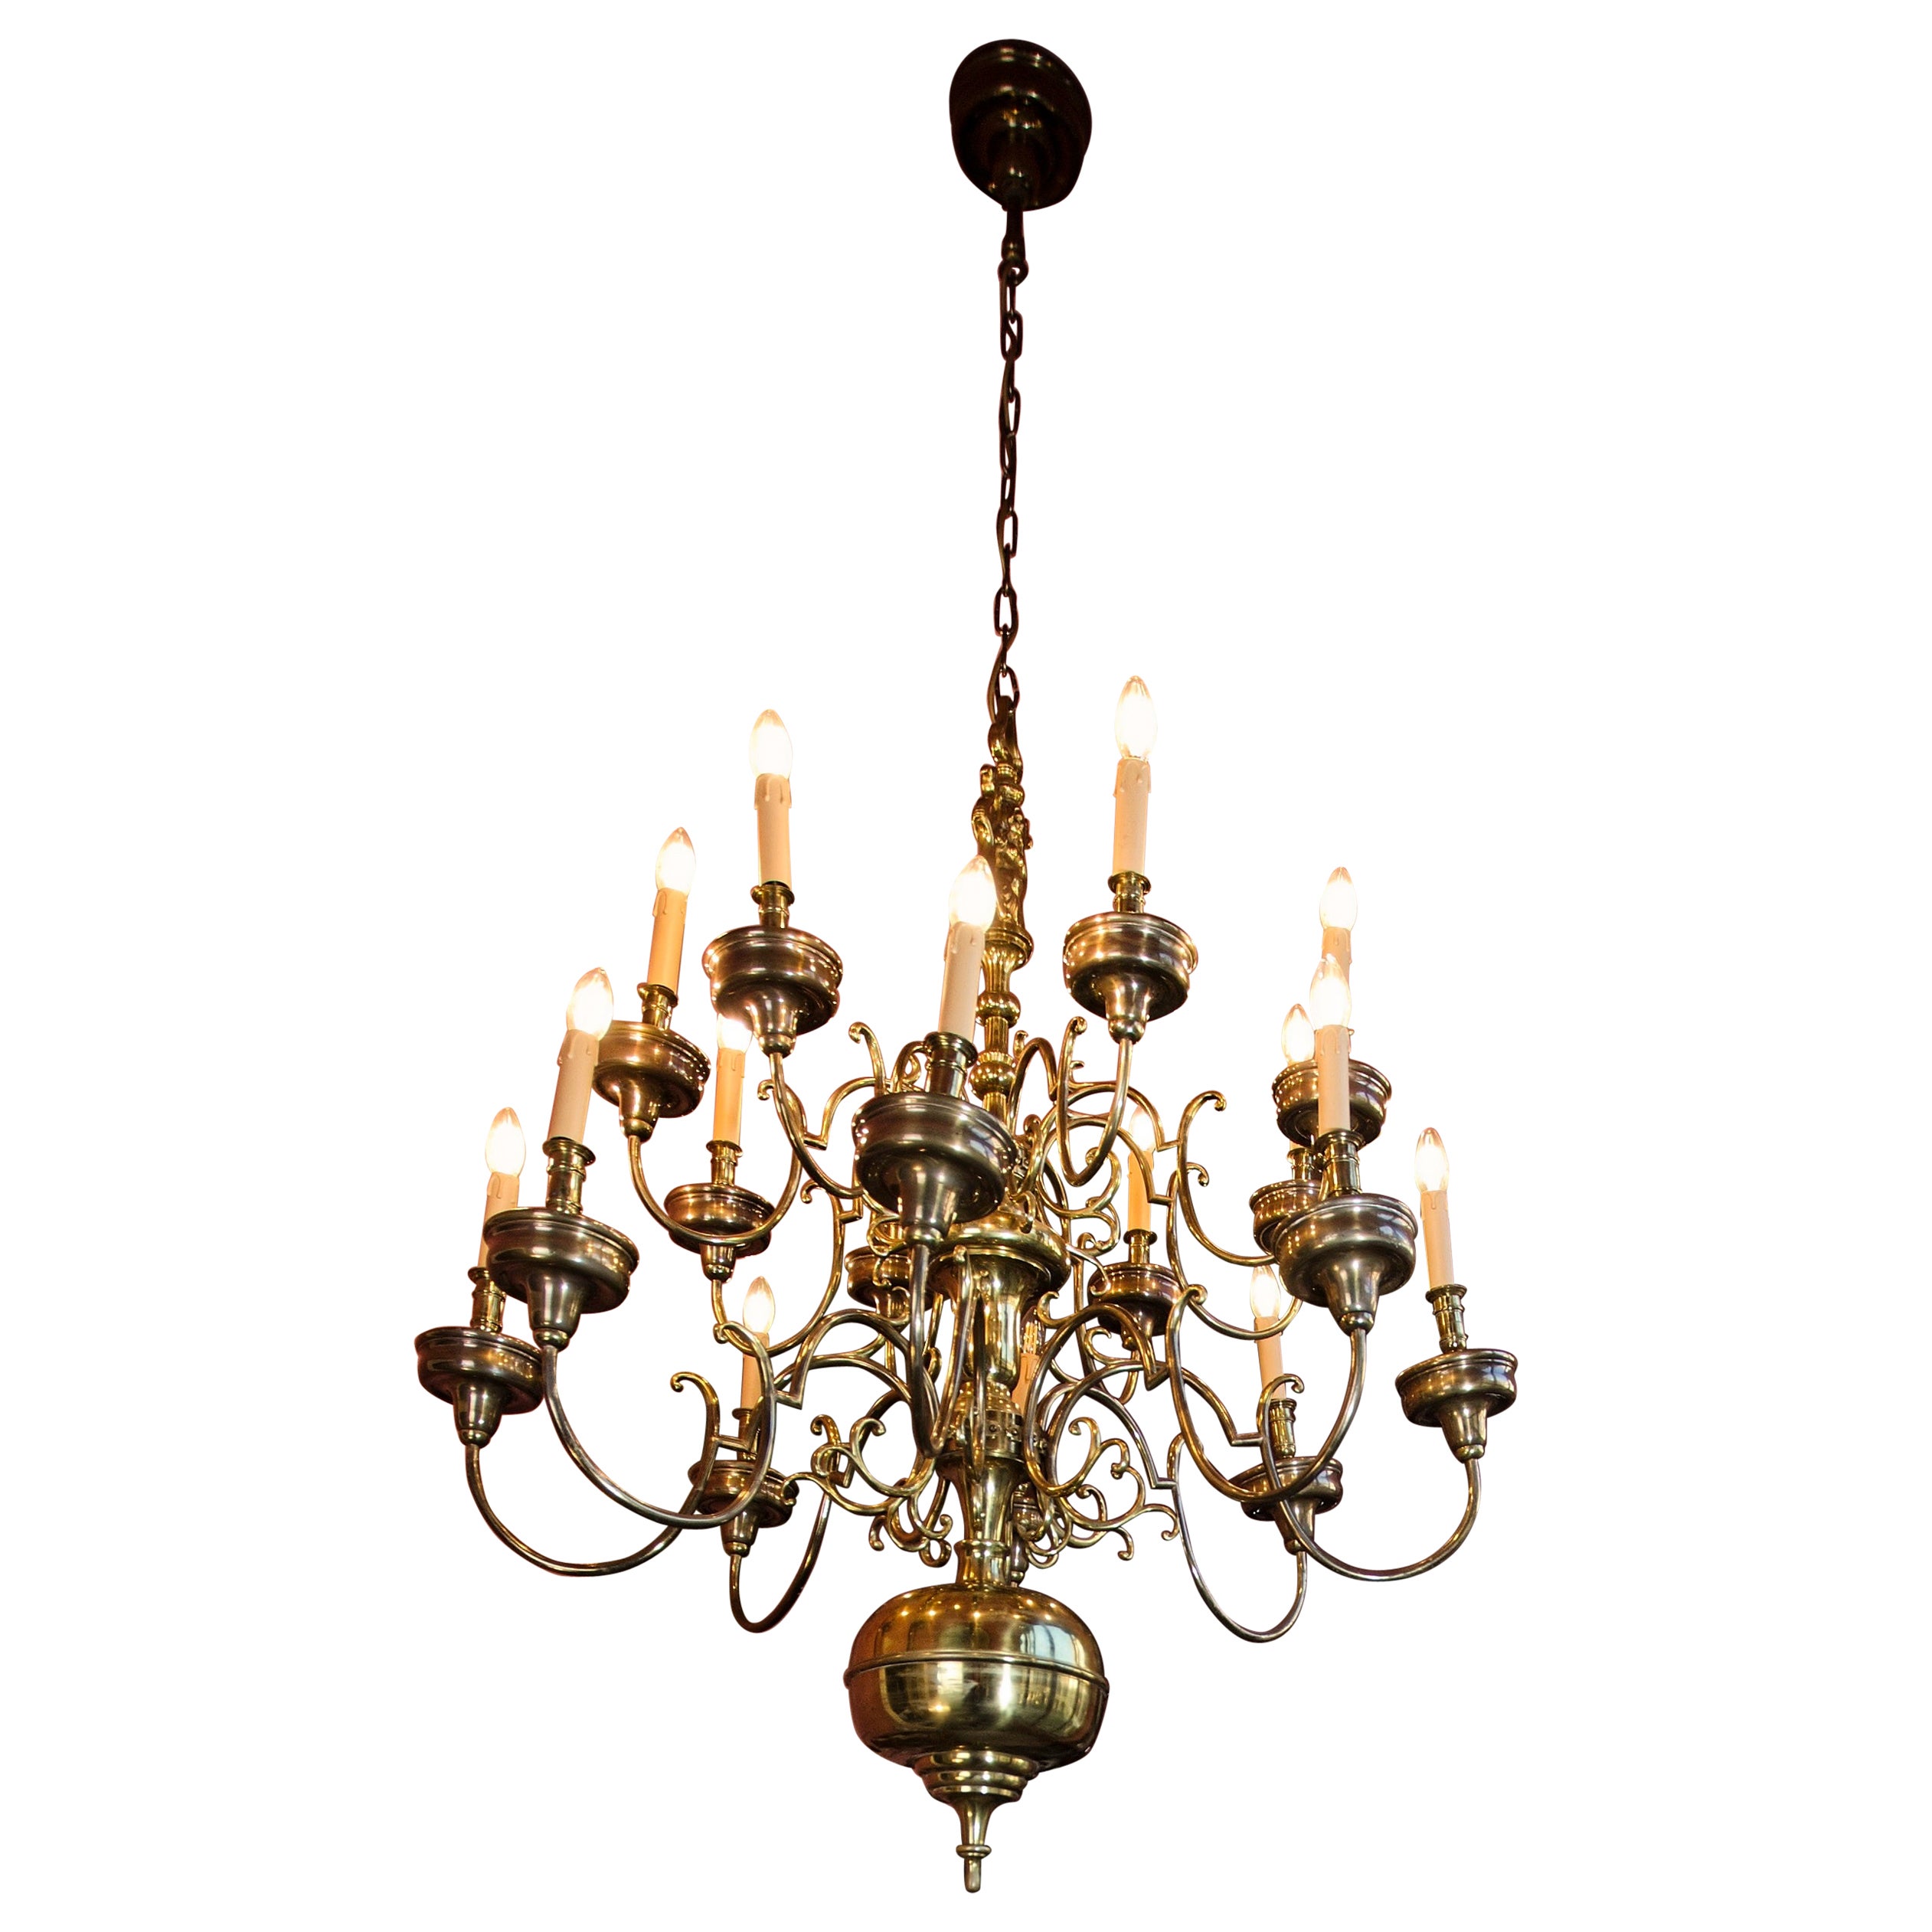 Large castle chandelier with a mermaid, 16 arms